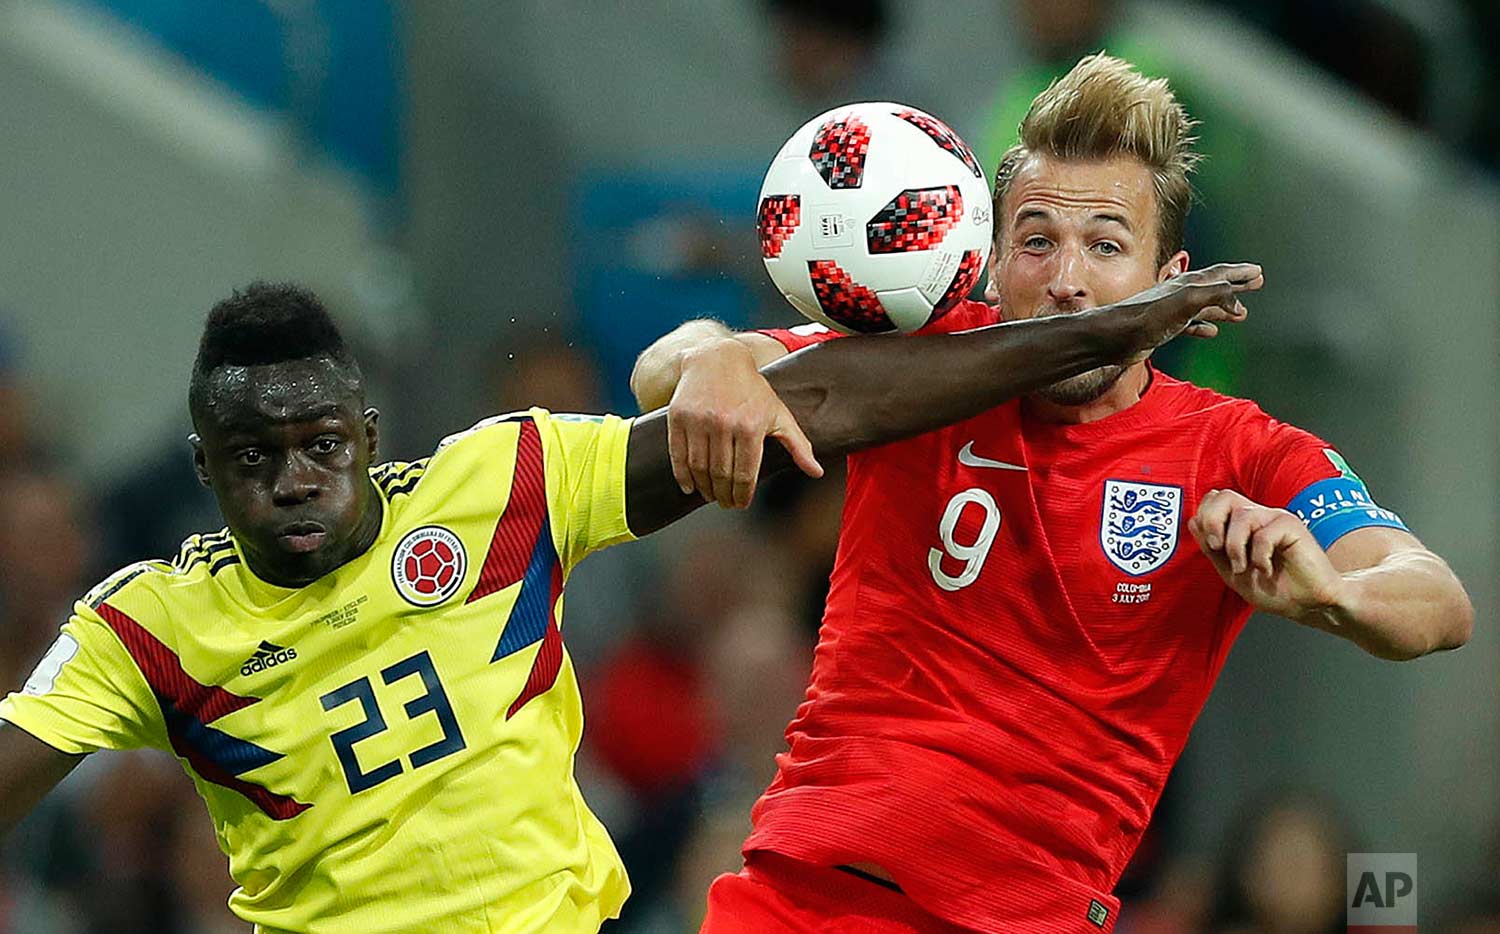  Colombia's Davinson Sanchez, left, and England's Harry Kane challenge for the ball during the round of 16 match between Colombia and England at the 2018 soccer World Cup in the Spartak Stadium, in Moscow, Russia, Tuesday, July 3, 2018. (AP Photo/Ala